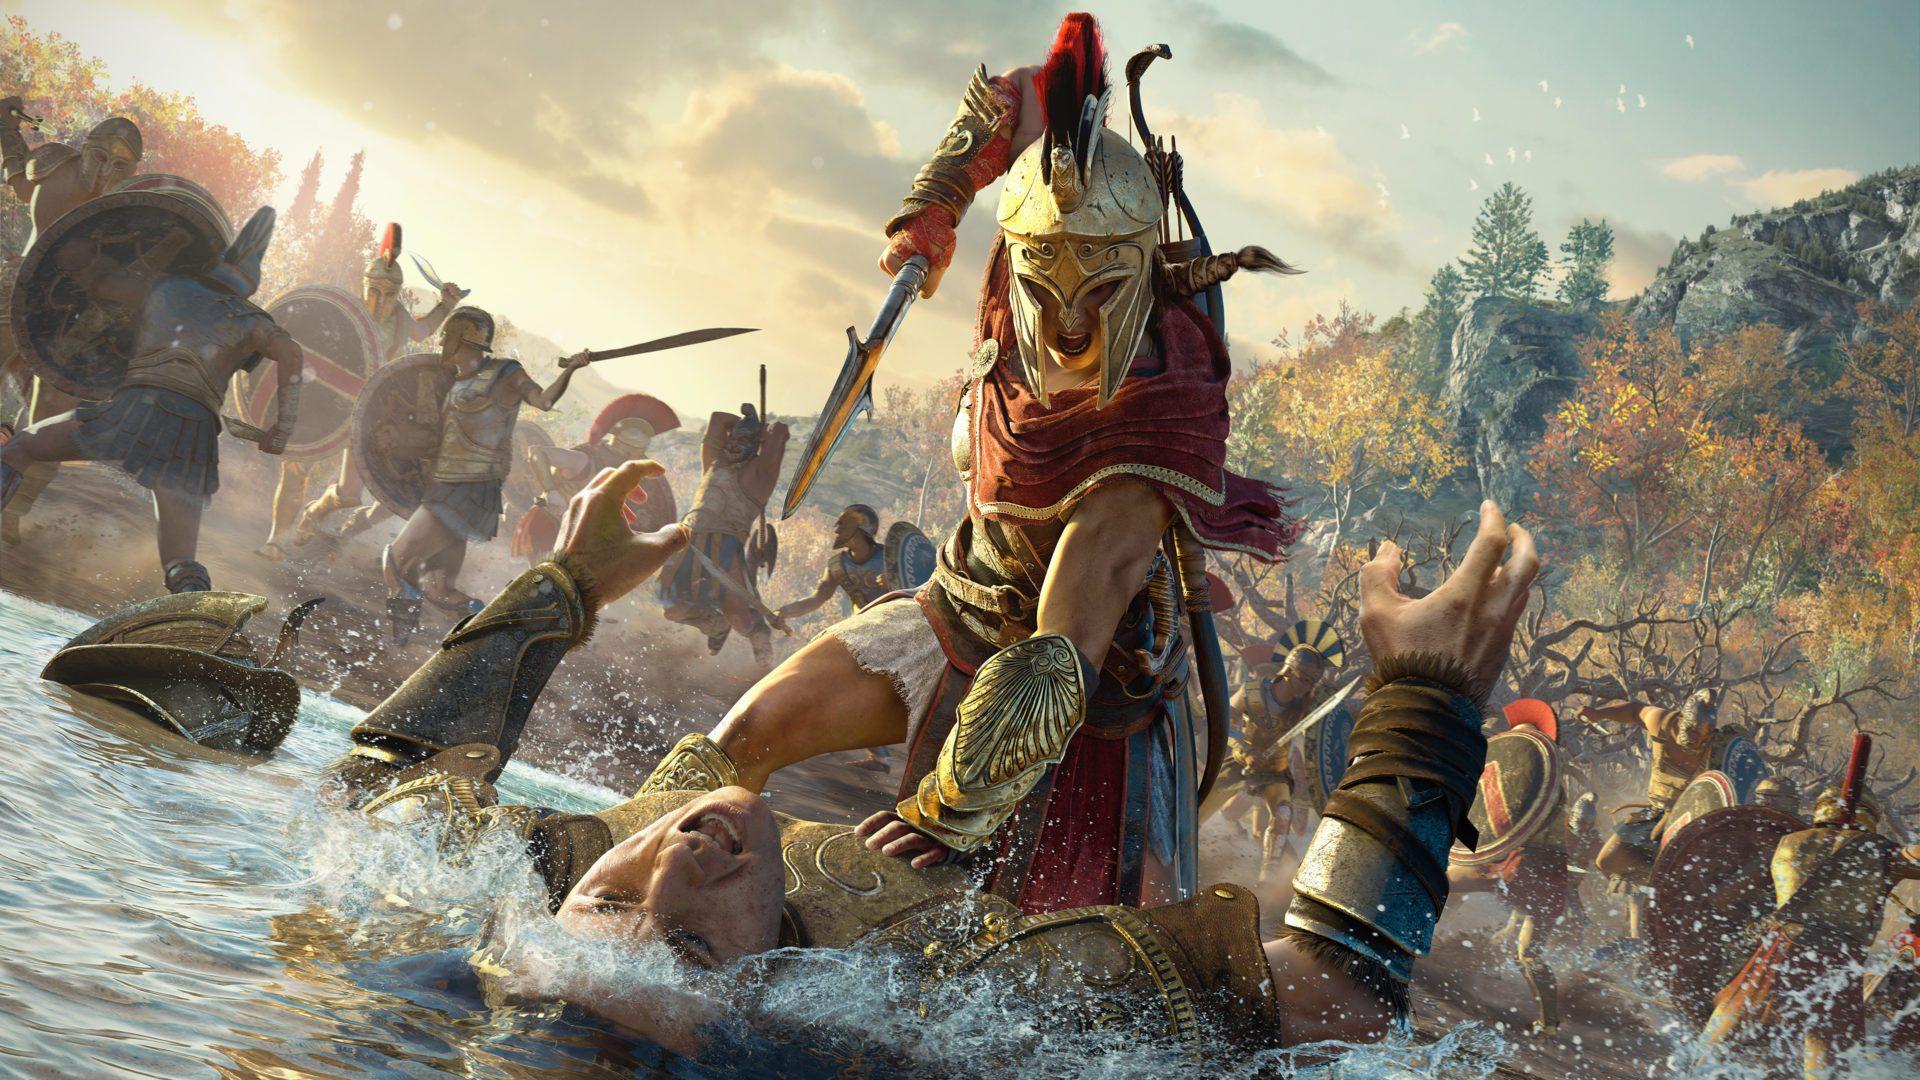 Assassin's Creed 2020 is definitely about Vikings, according to a